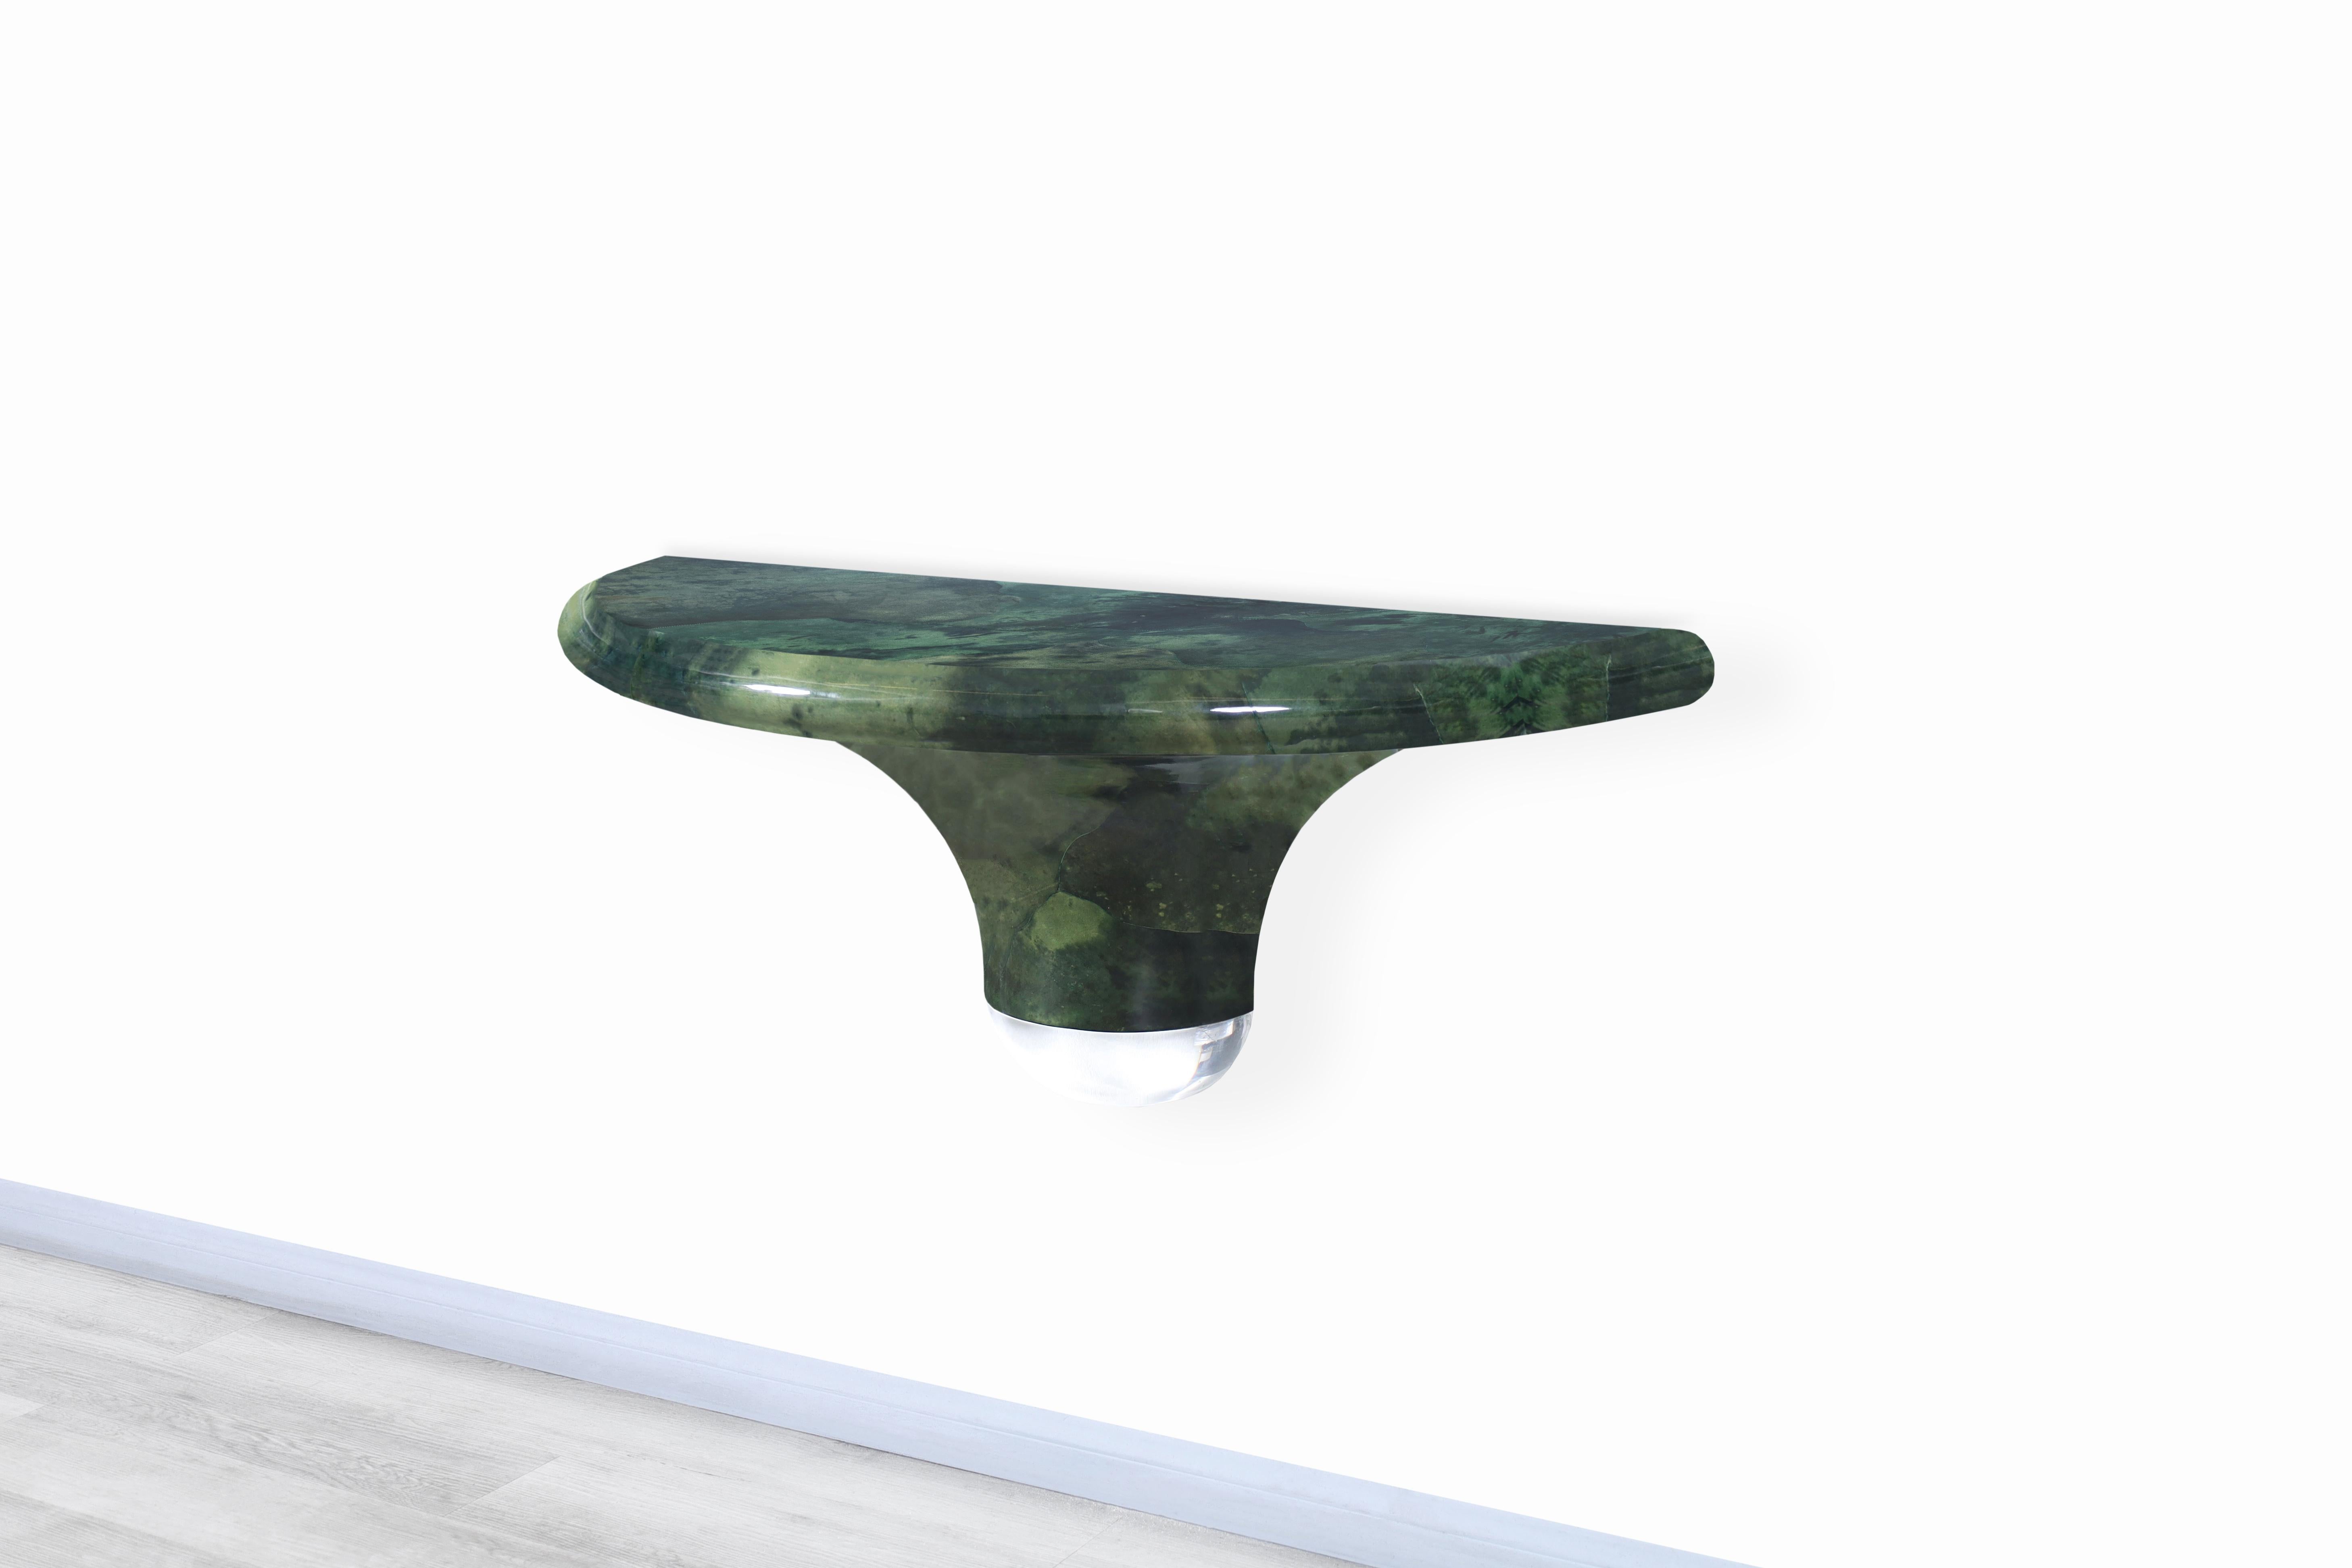 Amazing vintage wall-mounted leather goatskin console table attributed to Aldo Tura and manufactured in Italy, circa 1970s. This table has a conservative design where the quality of the materials used for its construction stands out. This table has